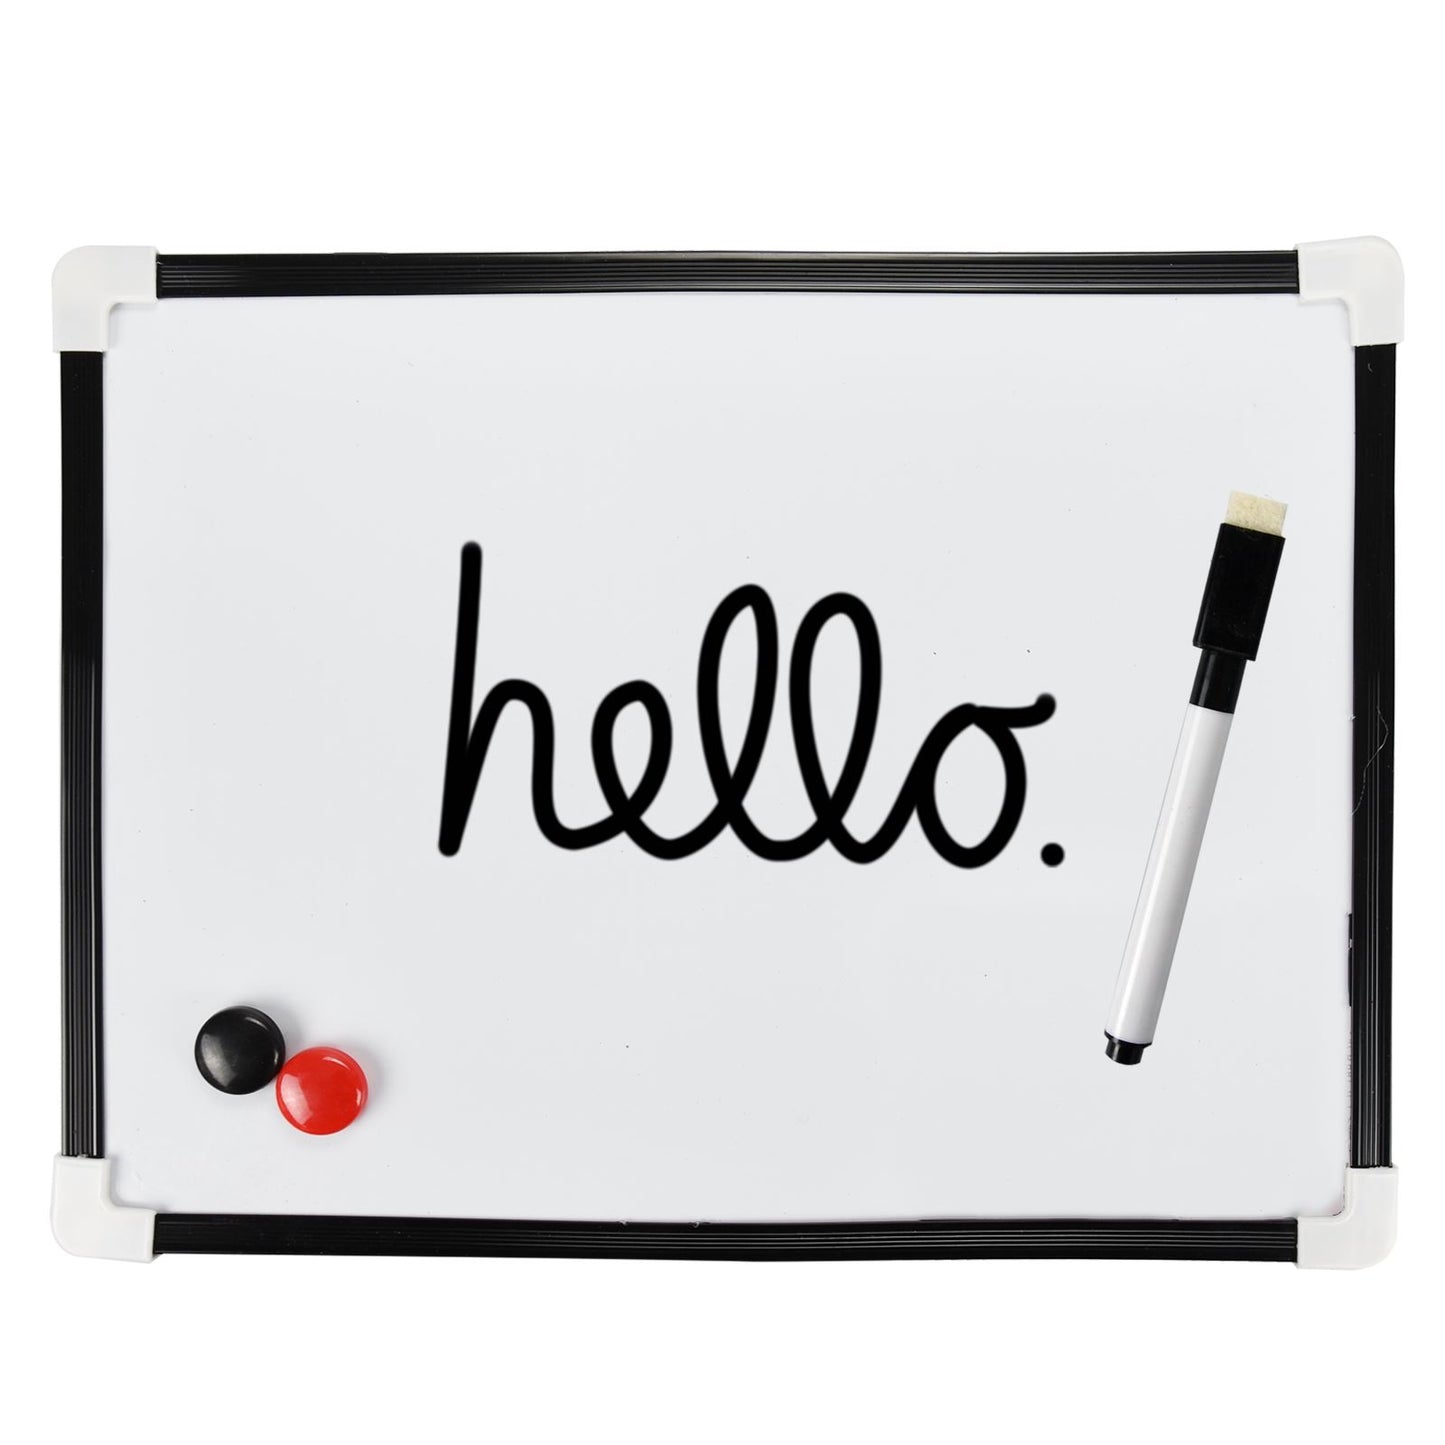 Magnetic Whiteboard with Dry Erase Marker Set